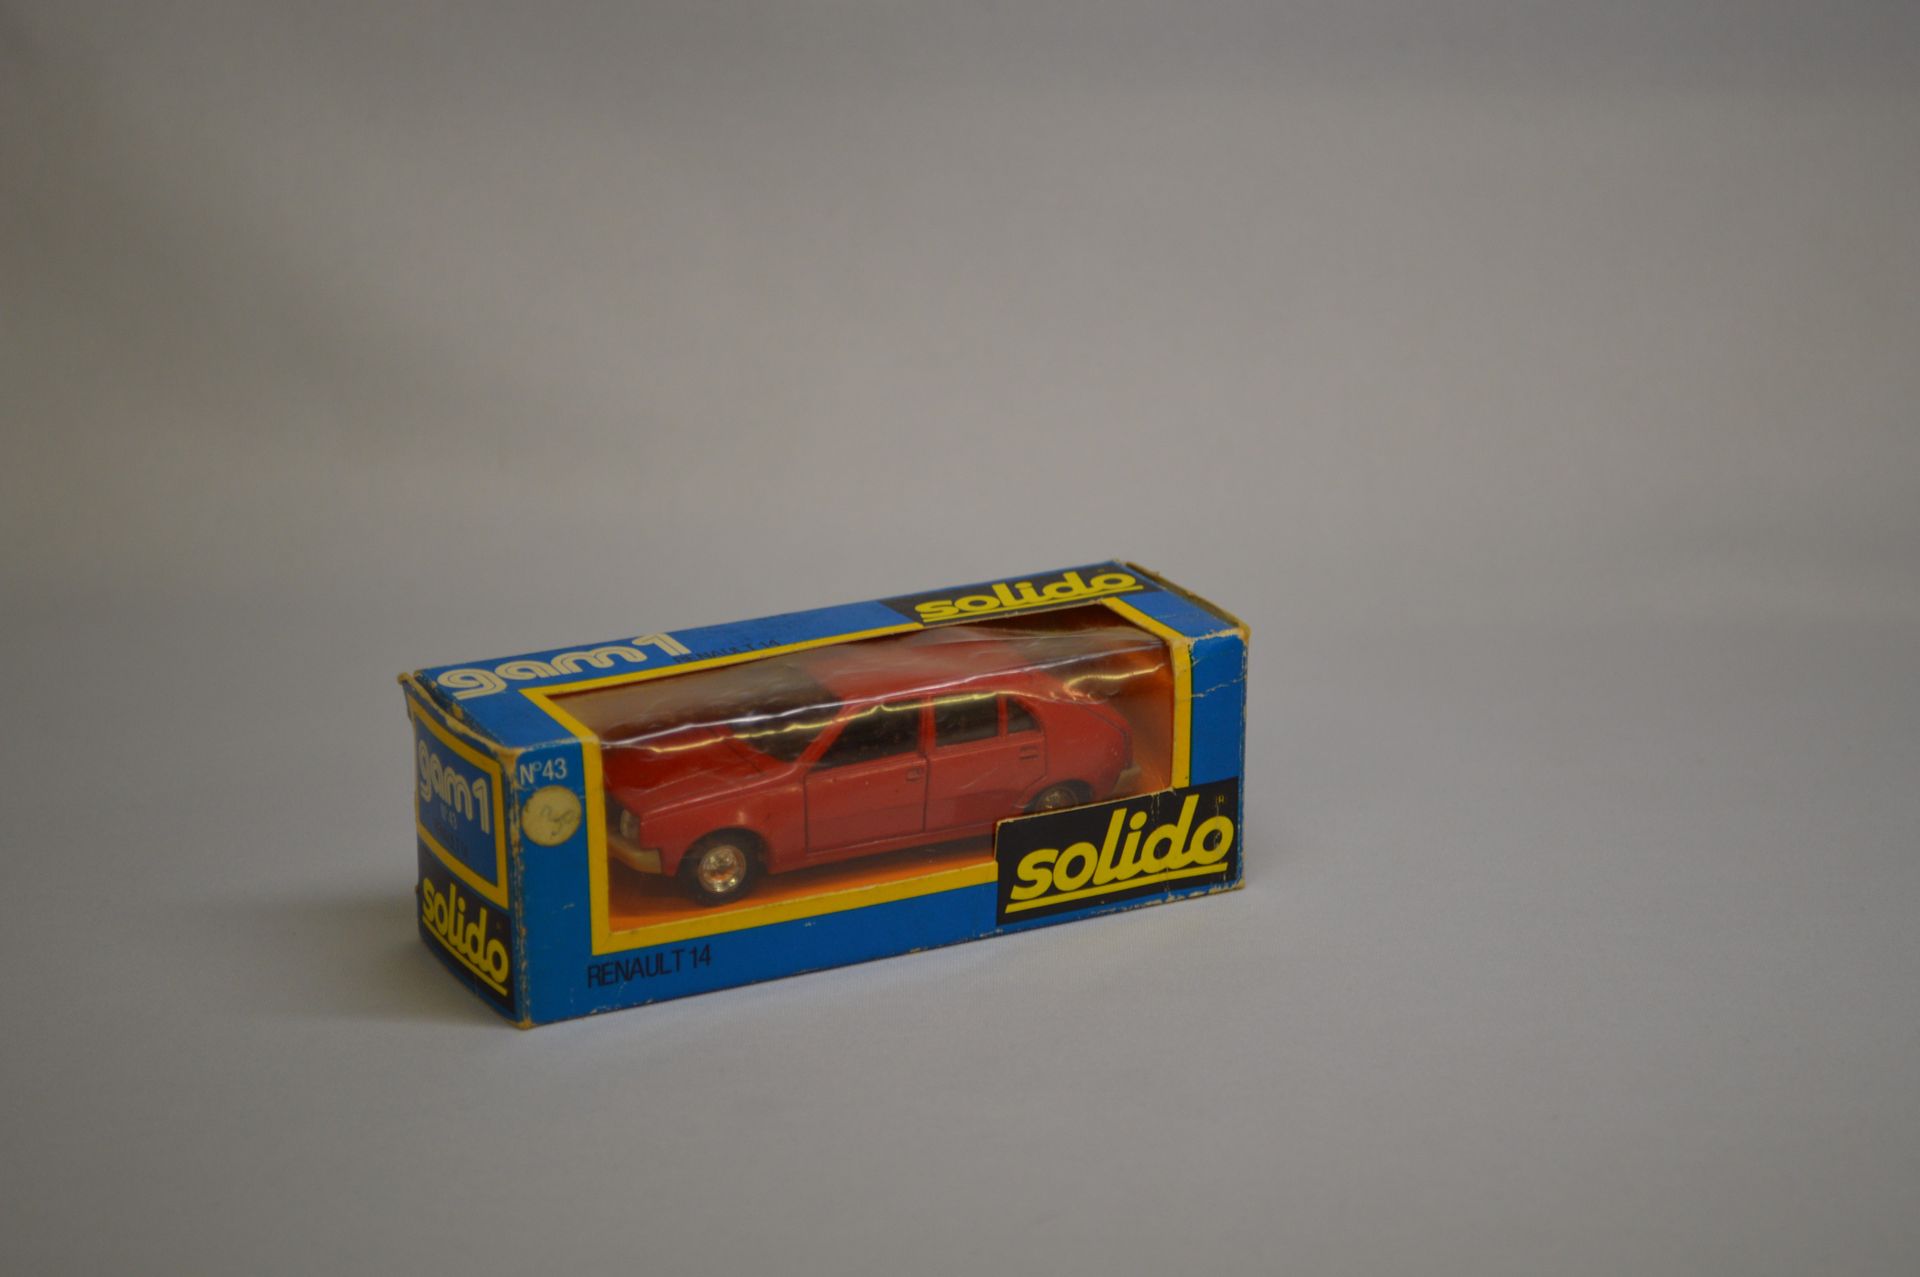 Null SOLIDO - GAM 1 - Touring car : Renault 14, n°43, red.

Original box. Proven&hellip;